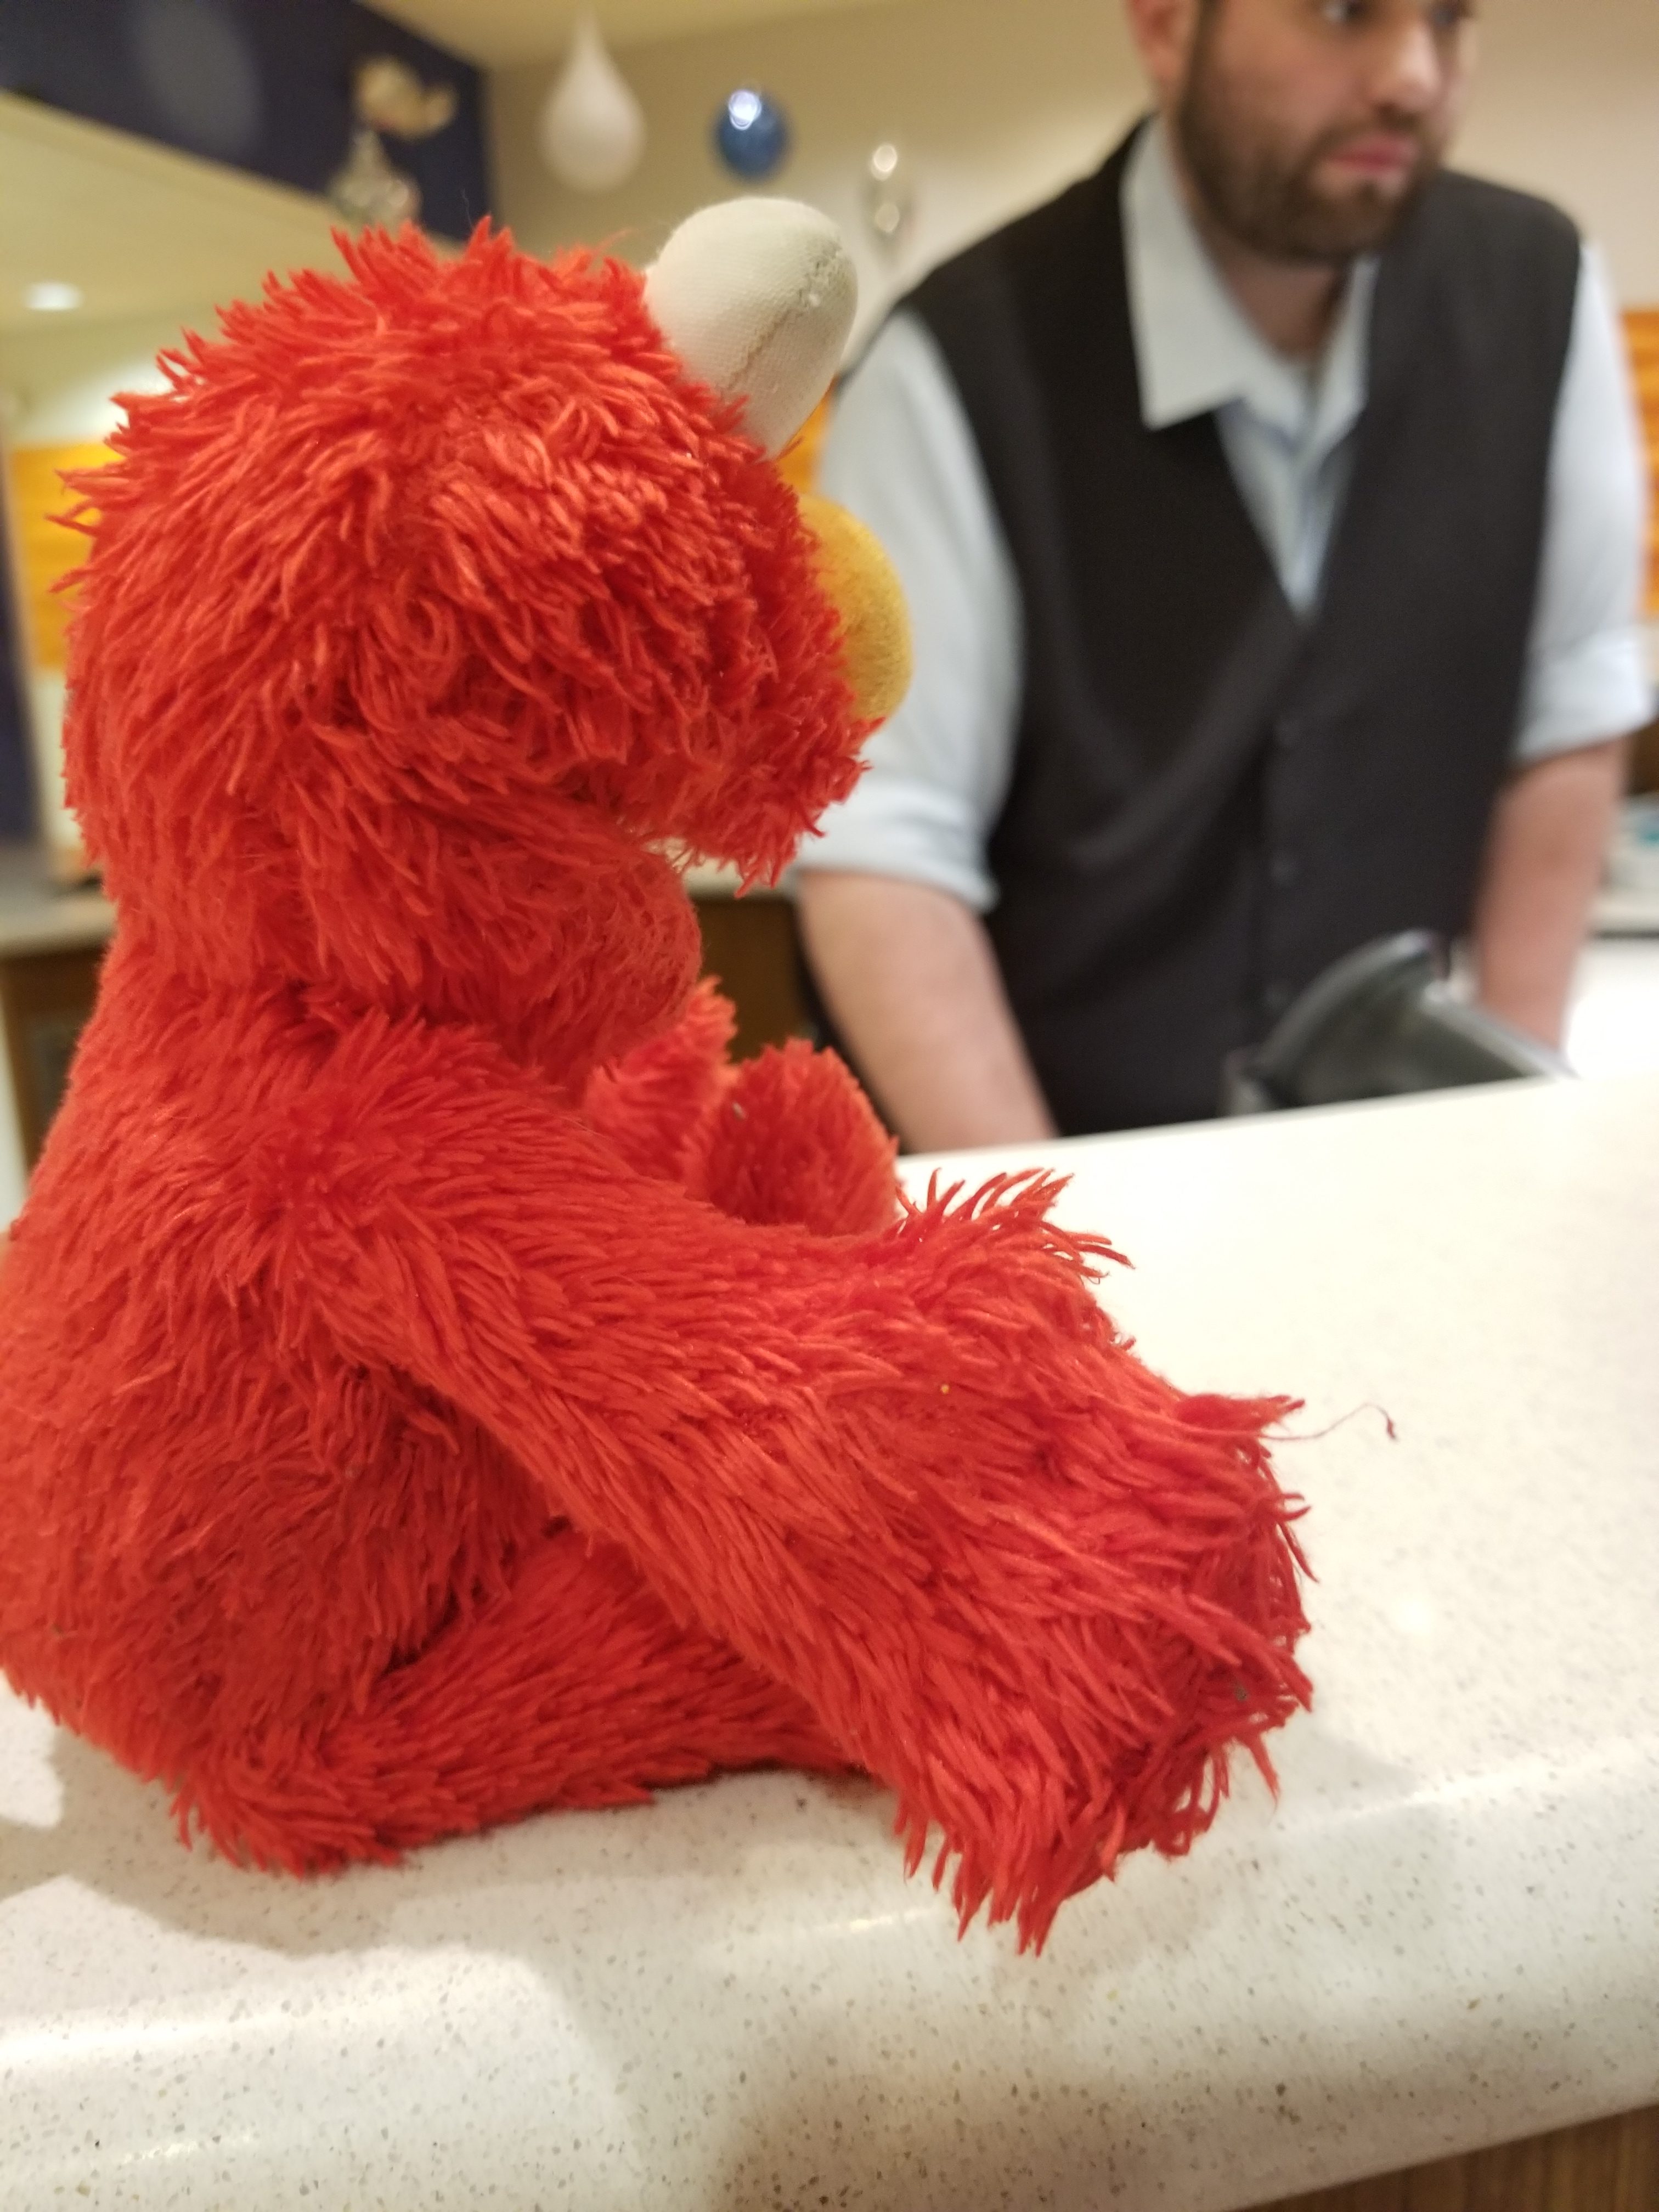 Elmo Checks In to his Hotel Room